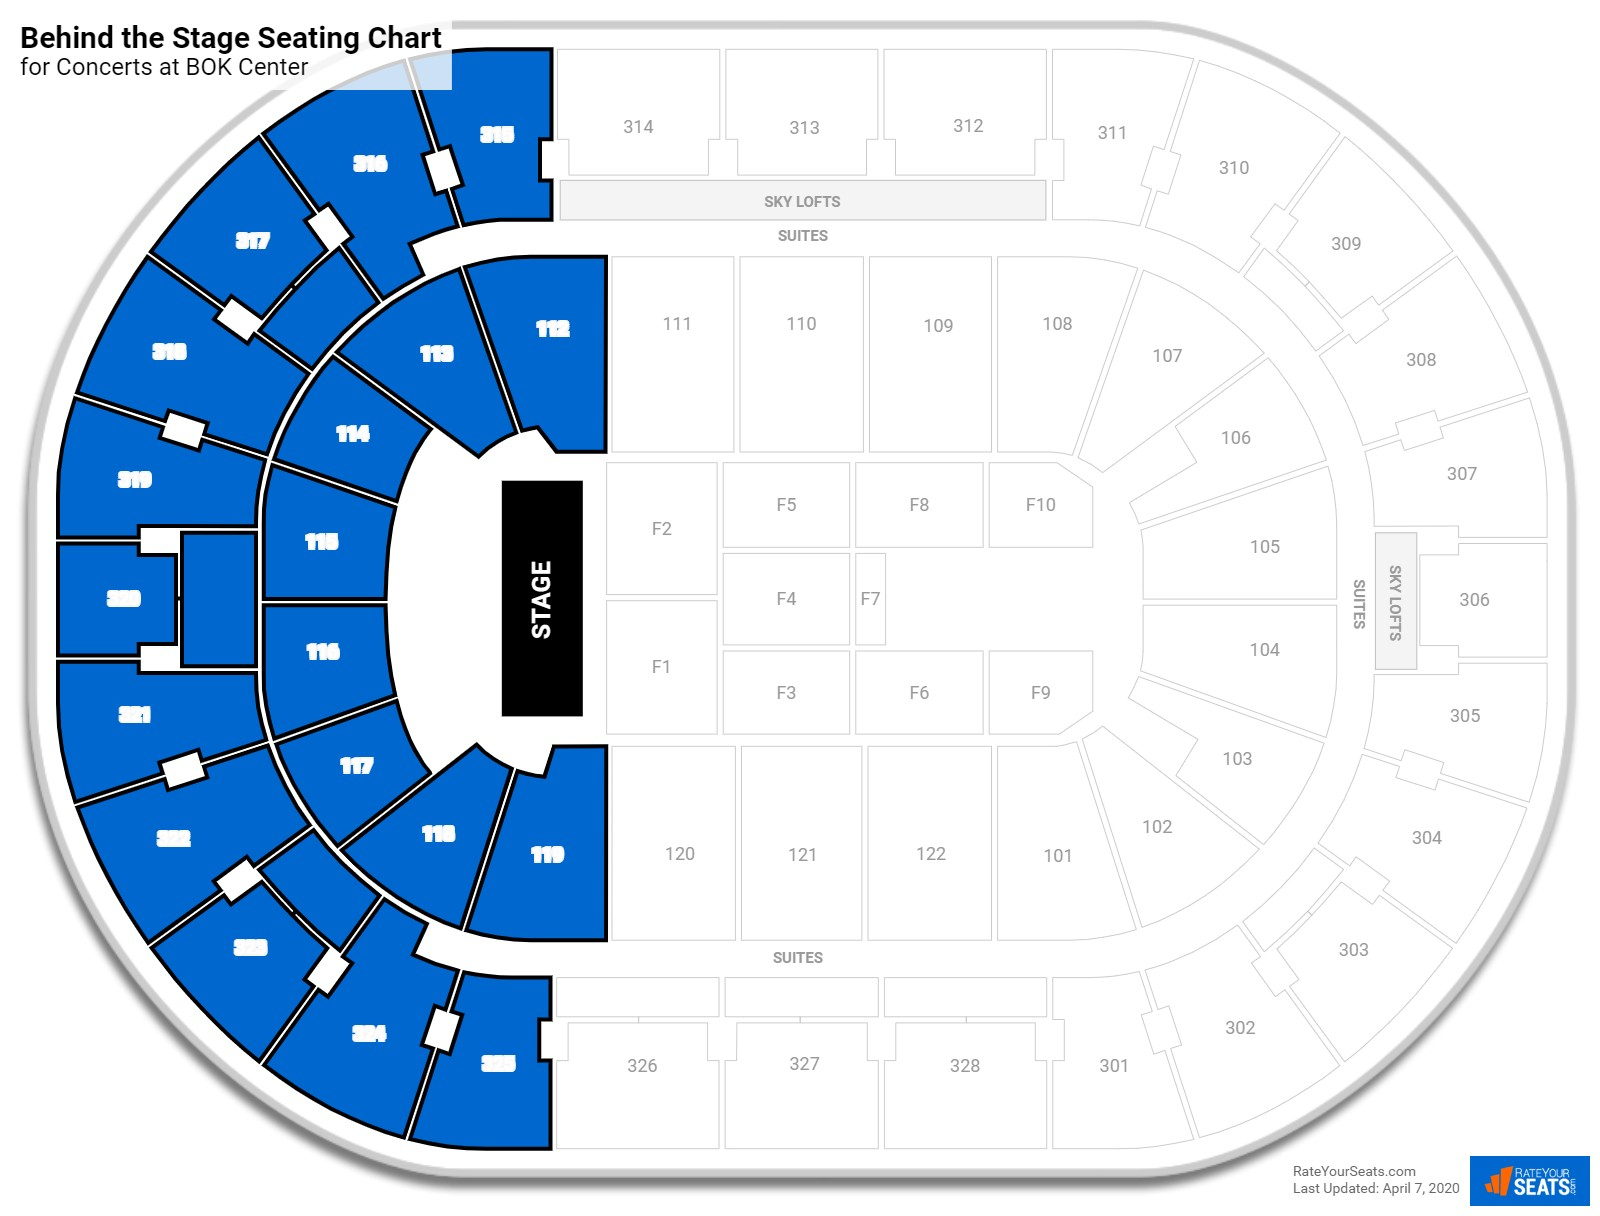 Bok Center Seating For Concerts  Rateyourseats throughout Bok Center Seating Chart Detailed